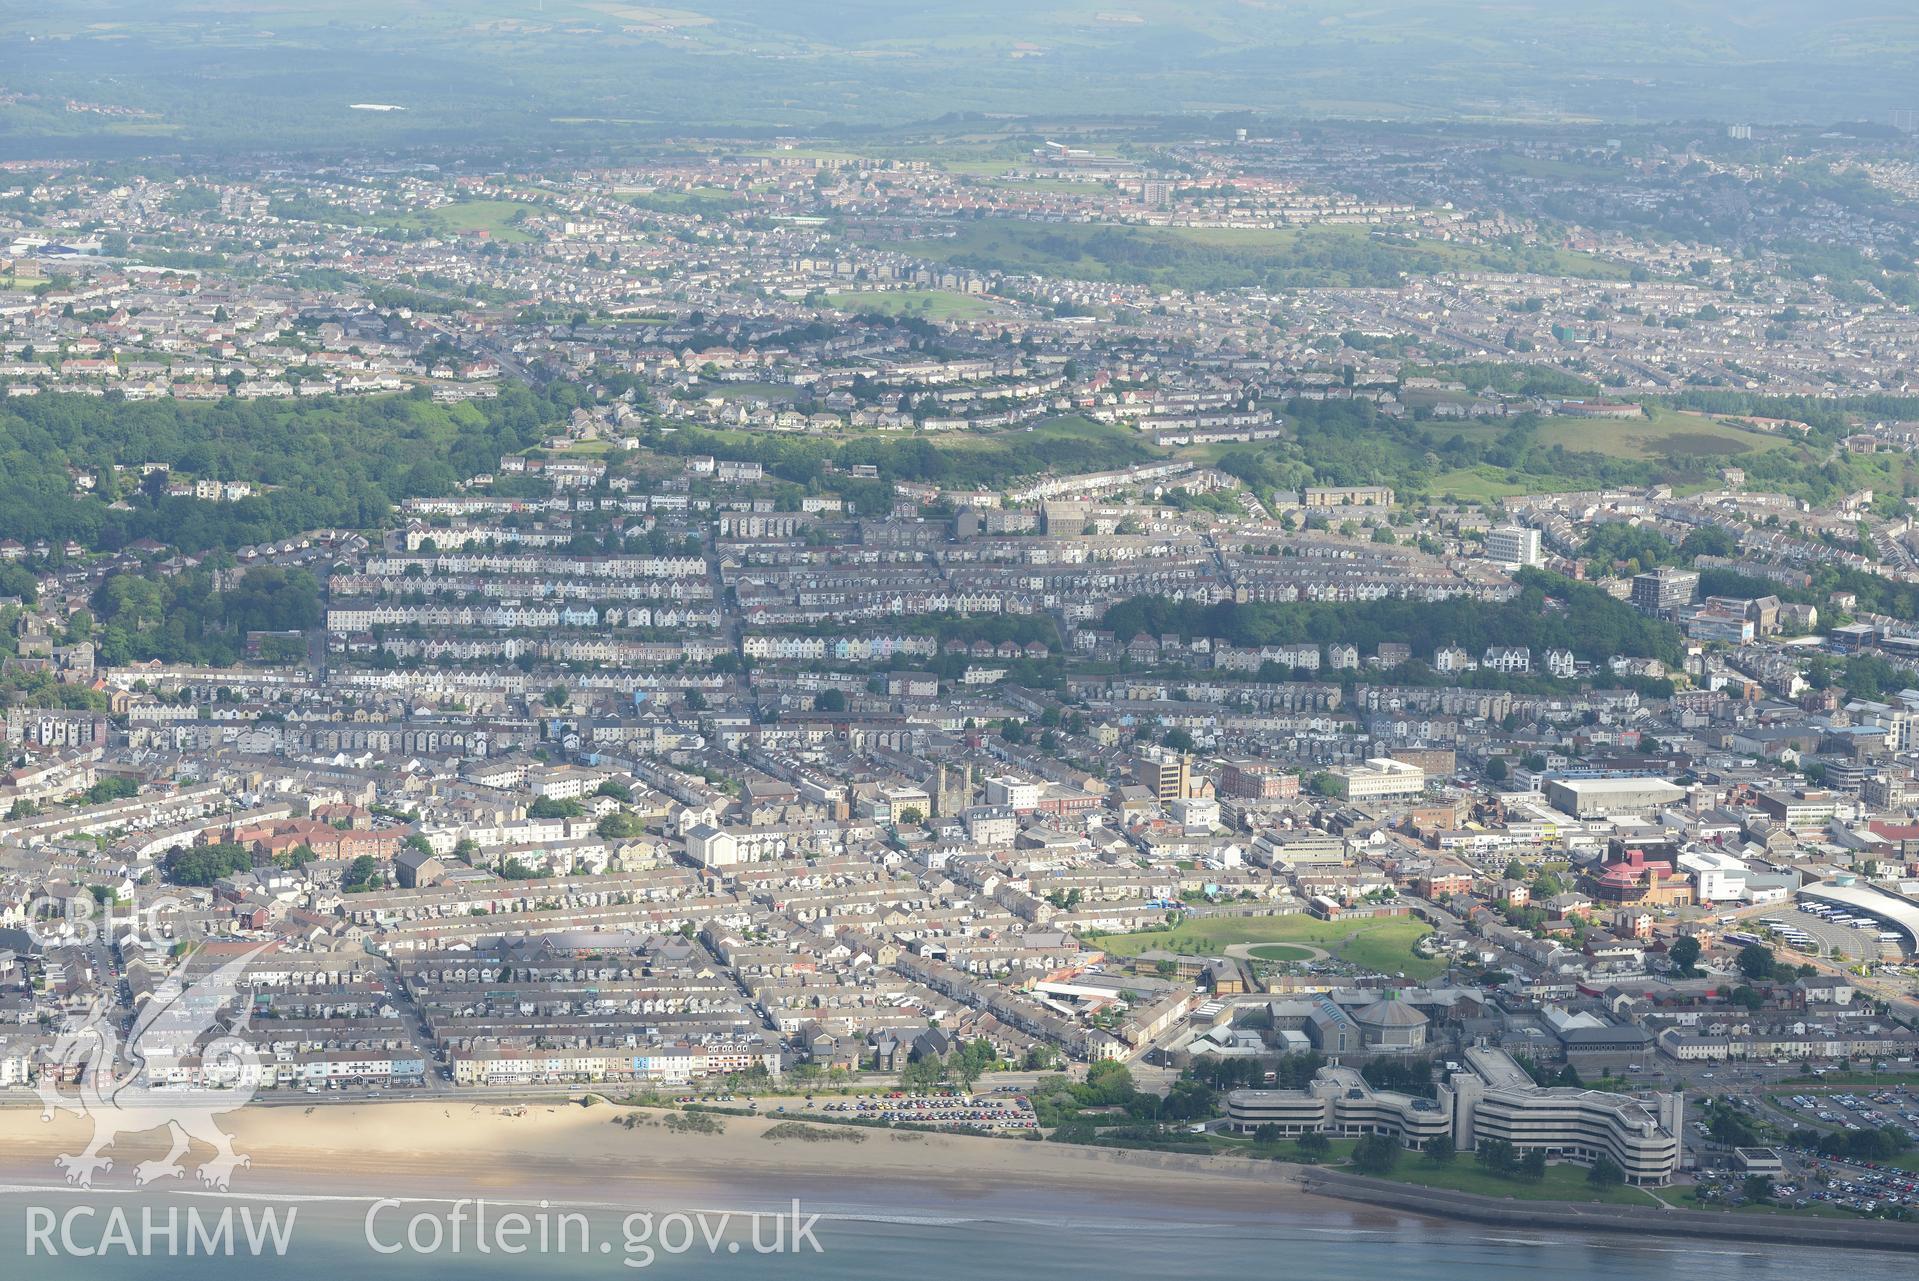 Views of the Vetch Field (football ground), Swansea County Hall and Swansea prison, taken from Swansea Bay. Oblique aerial photograph taken during the Royal Commission's programme of archaeological aerial reconnaissance by Toby Driver on 19th June 2015.